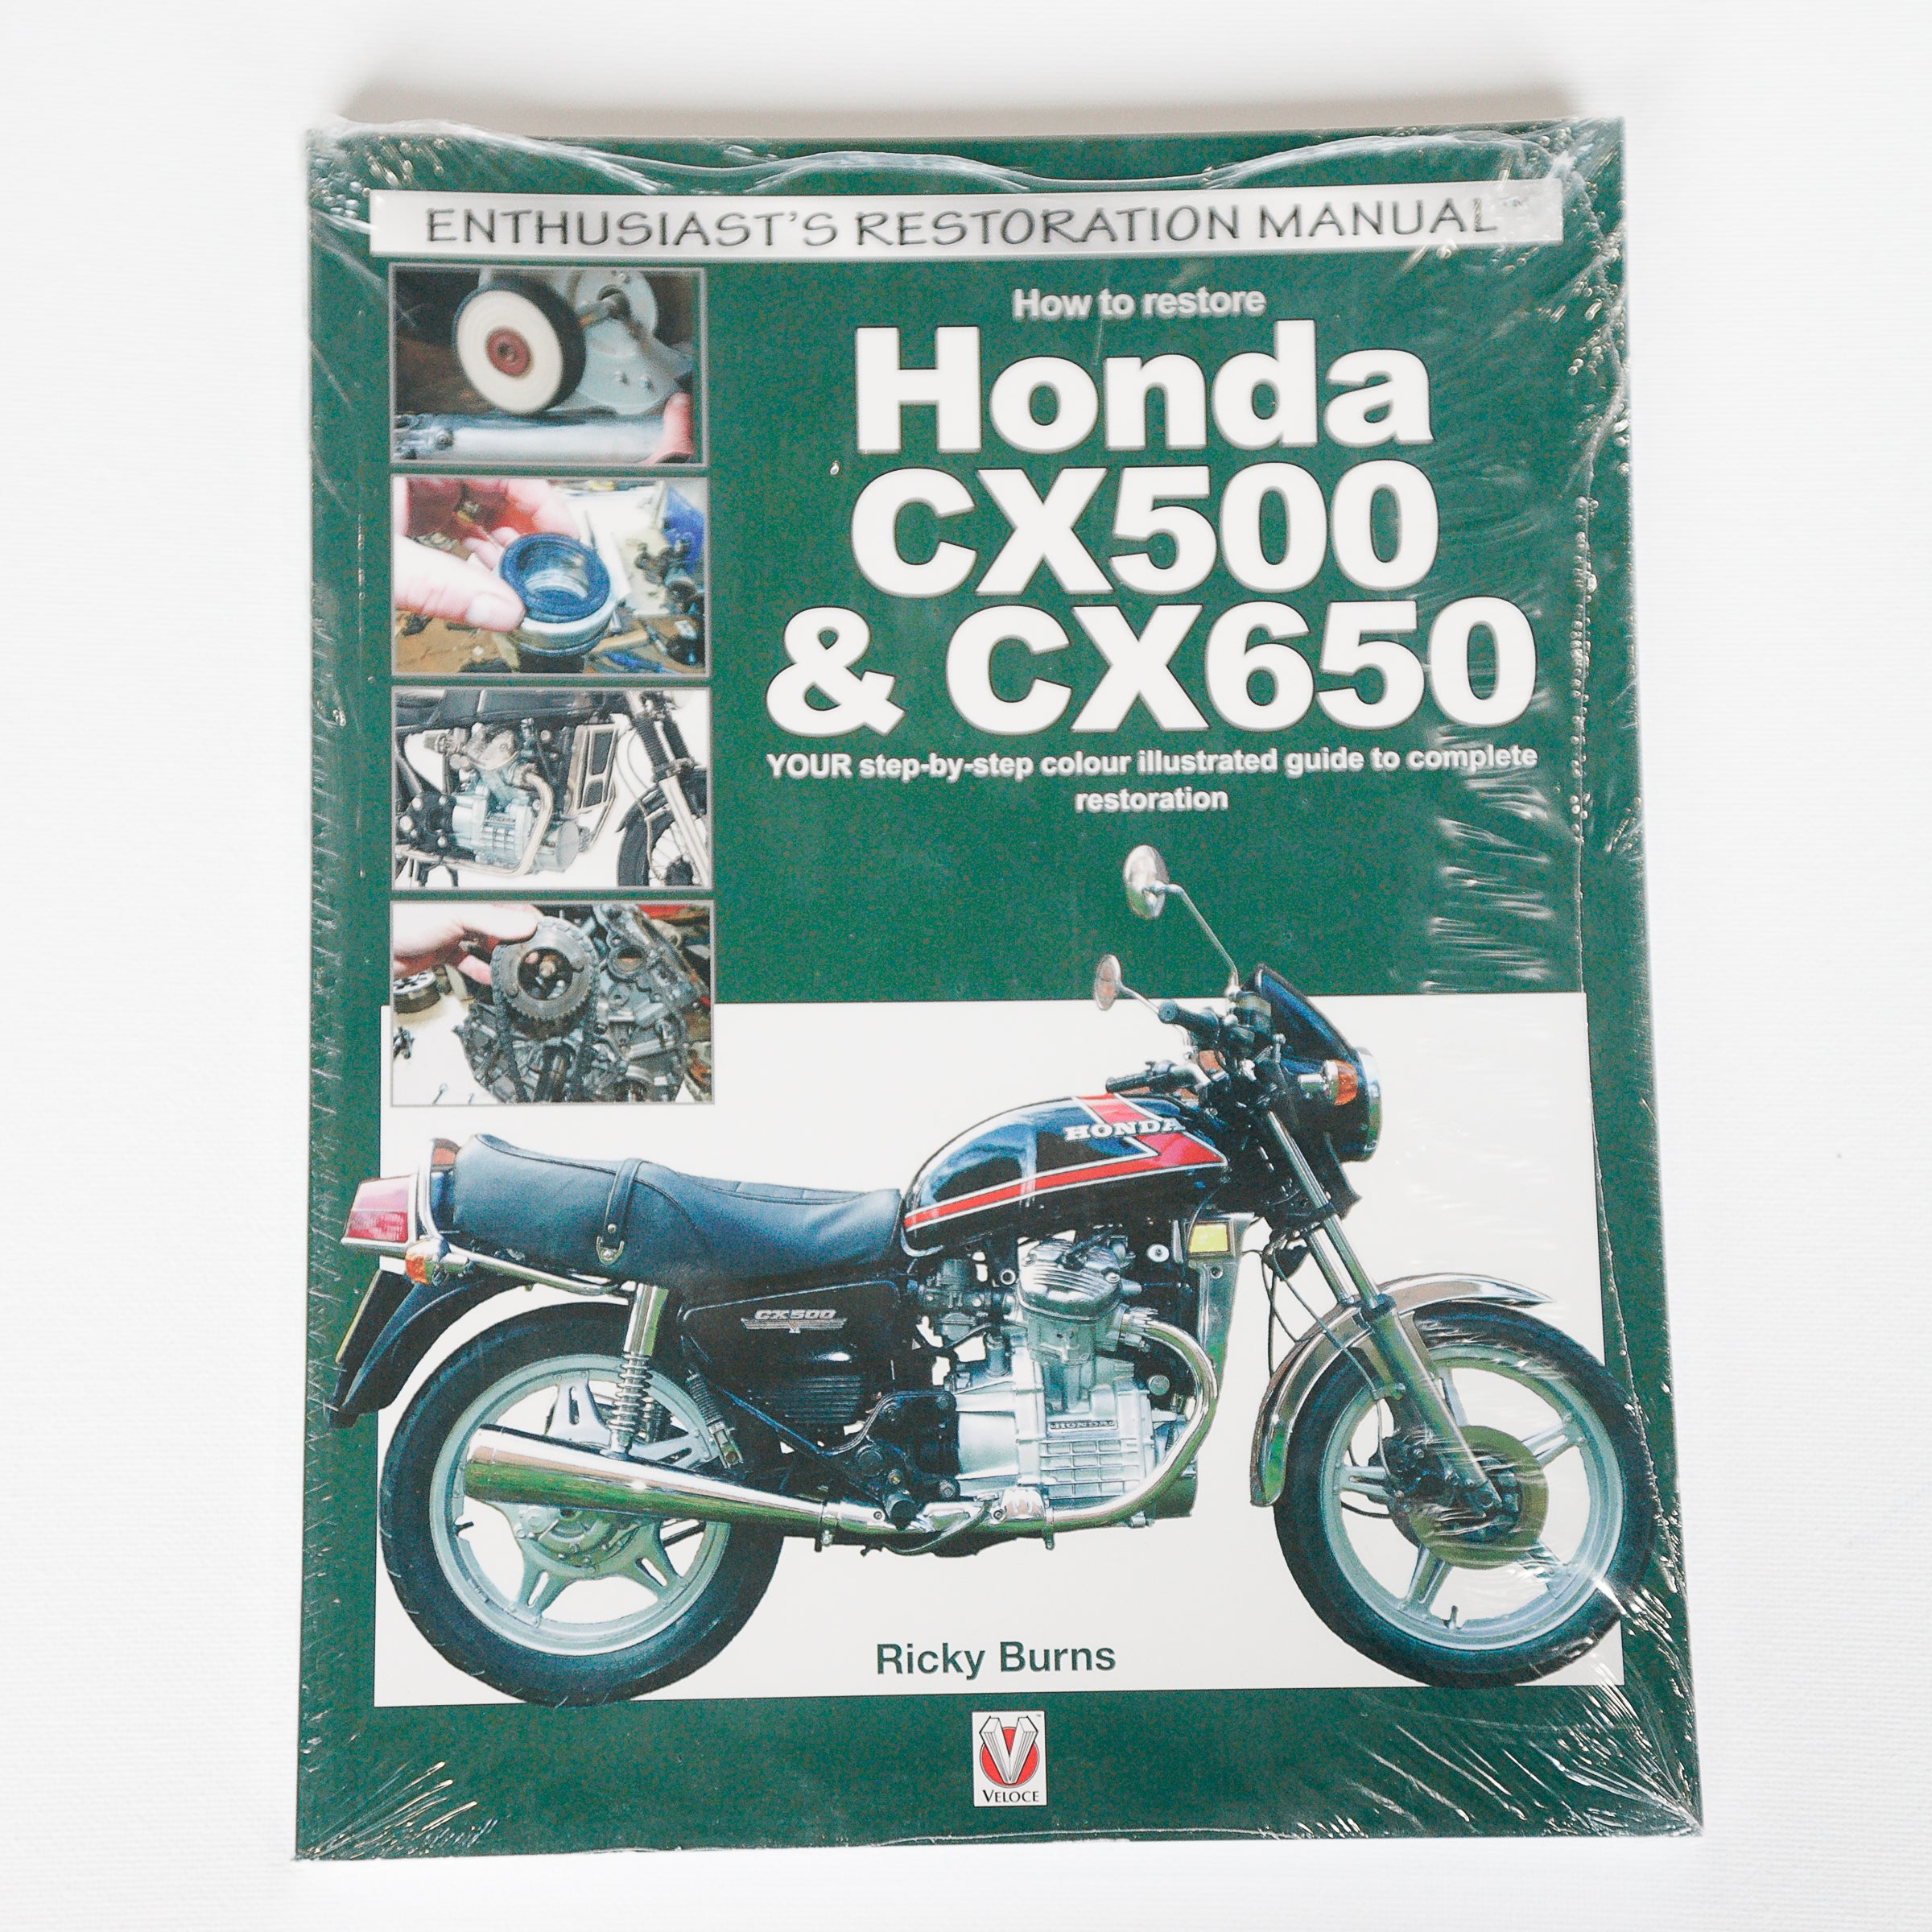 Dreamcycle Motorcycle Museum |  Honda restoration Manual on white background.